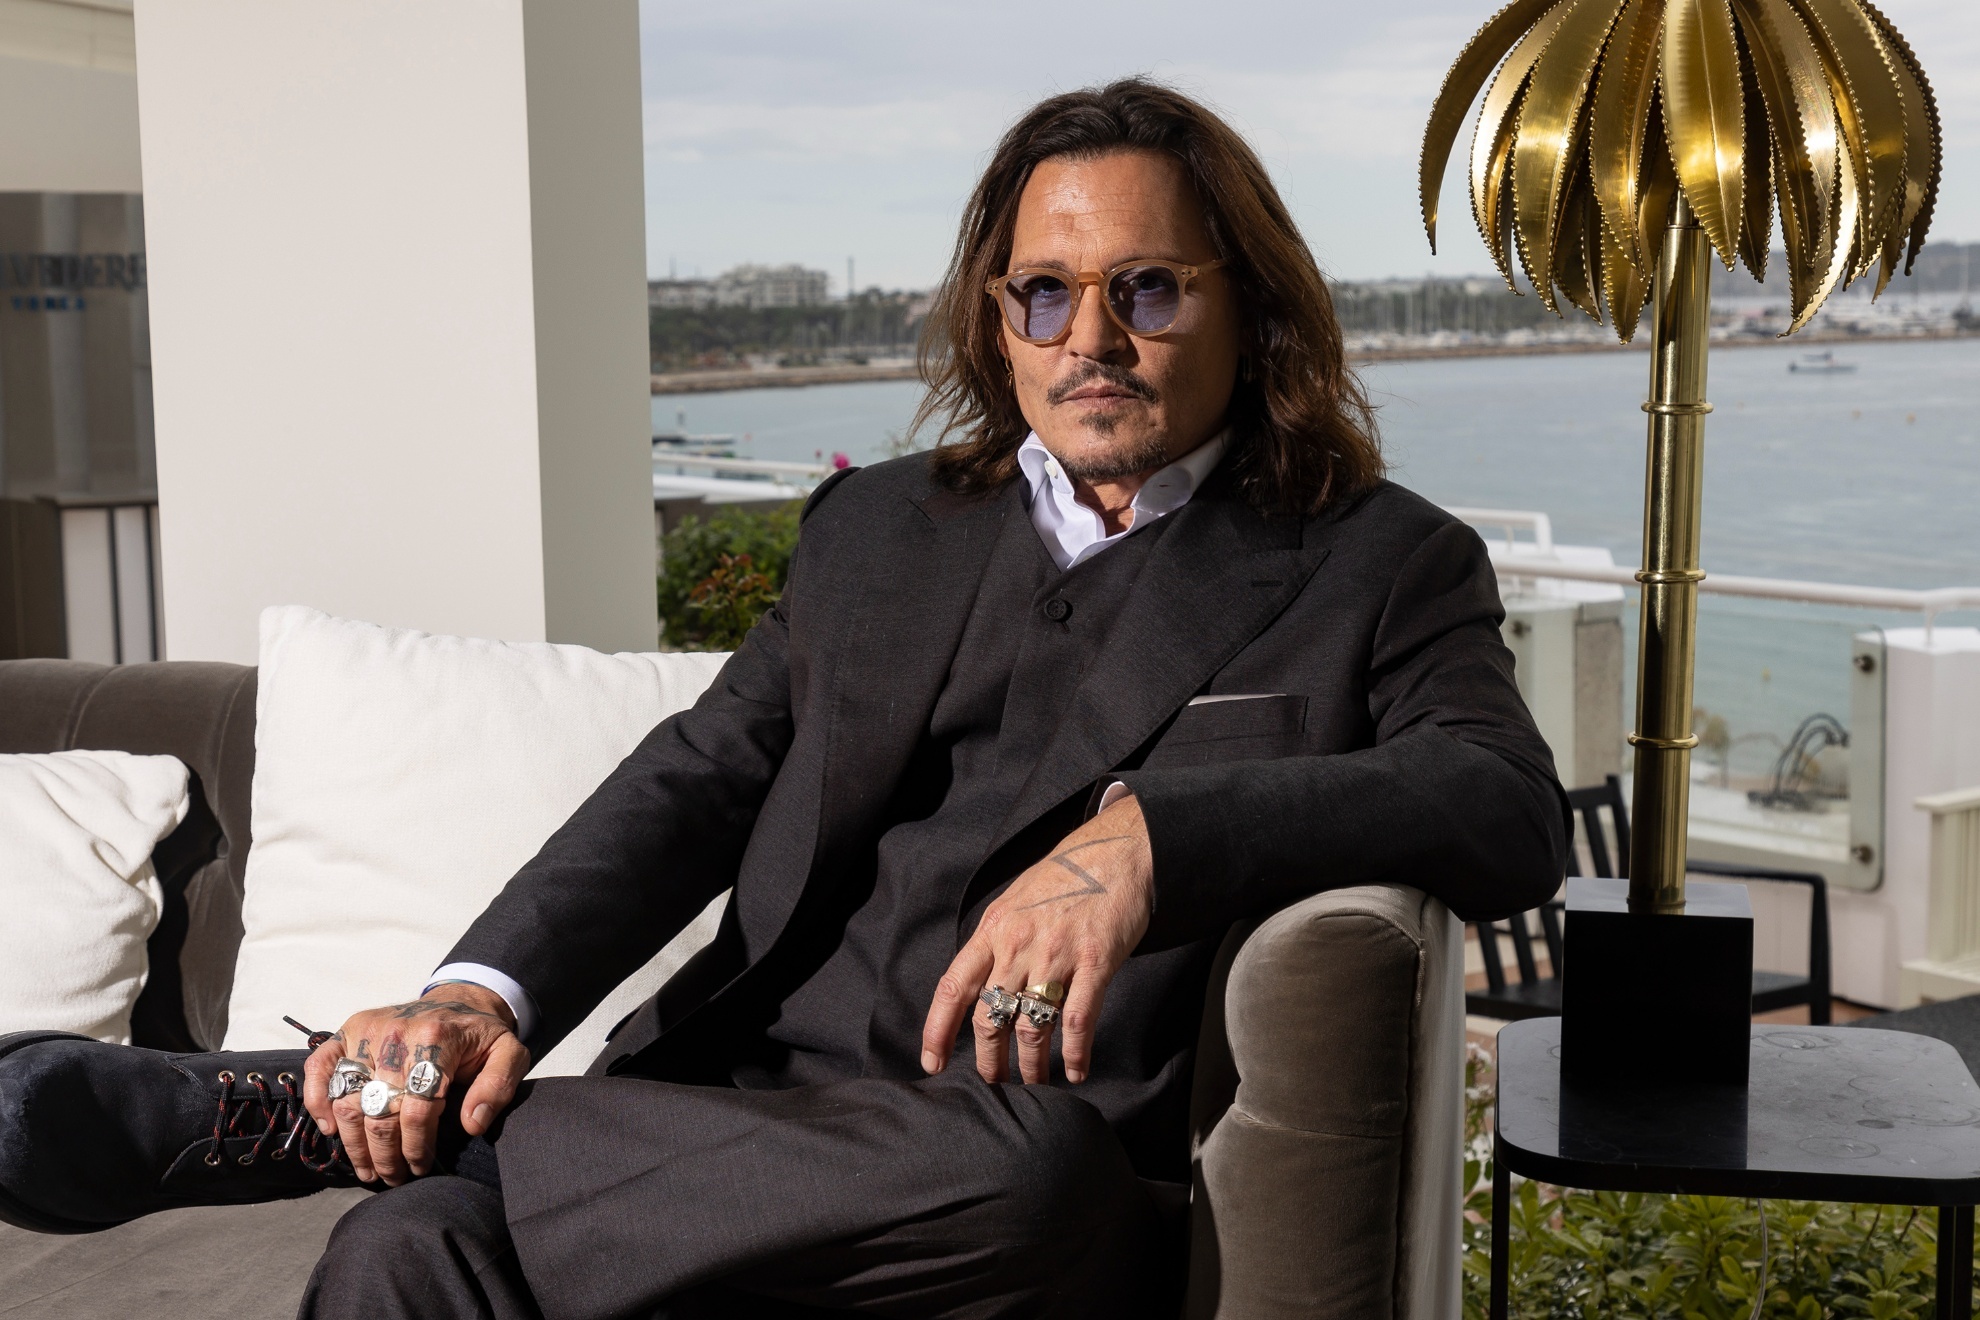 Johnny Depp at the 76th international film festival in Cannes.